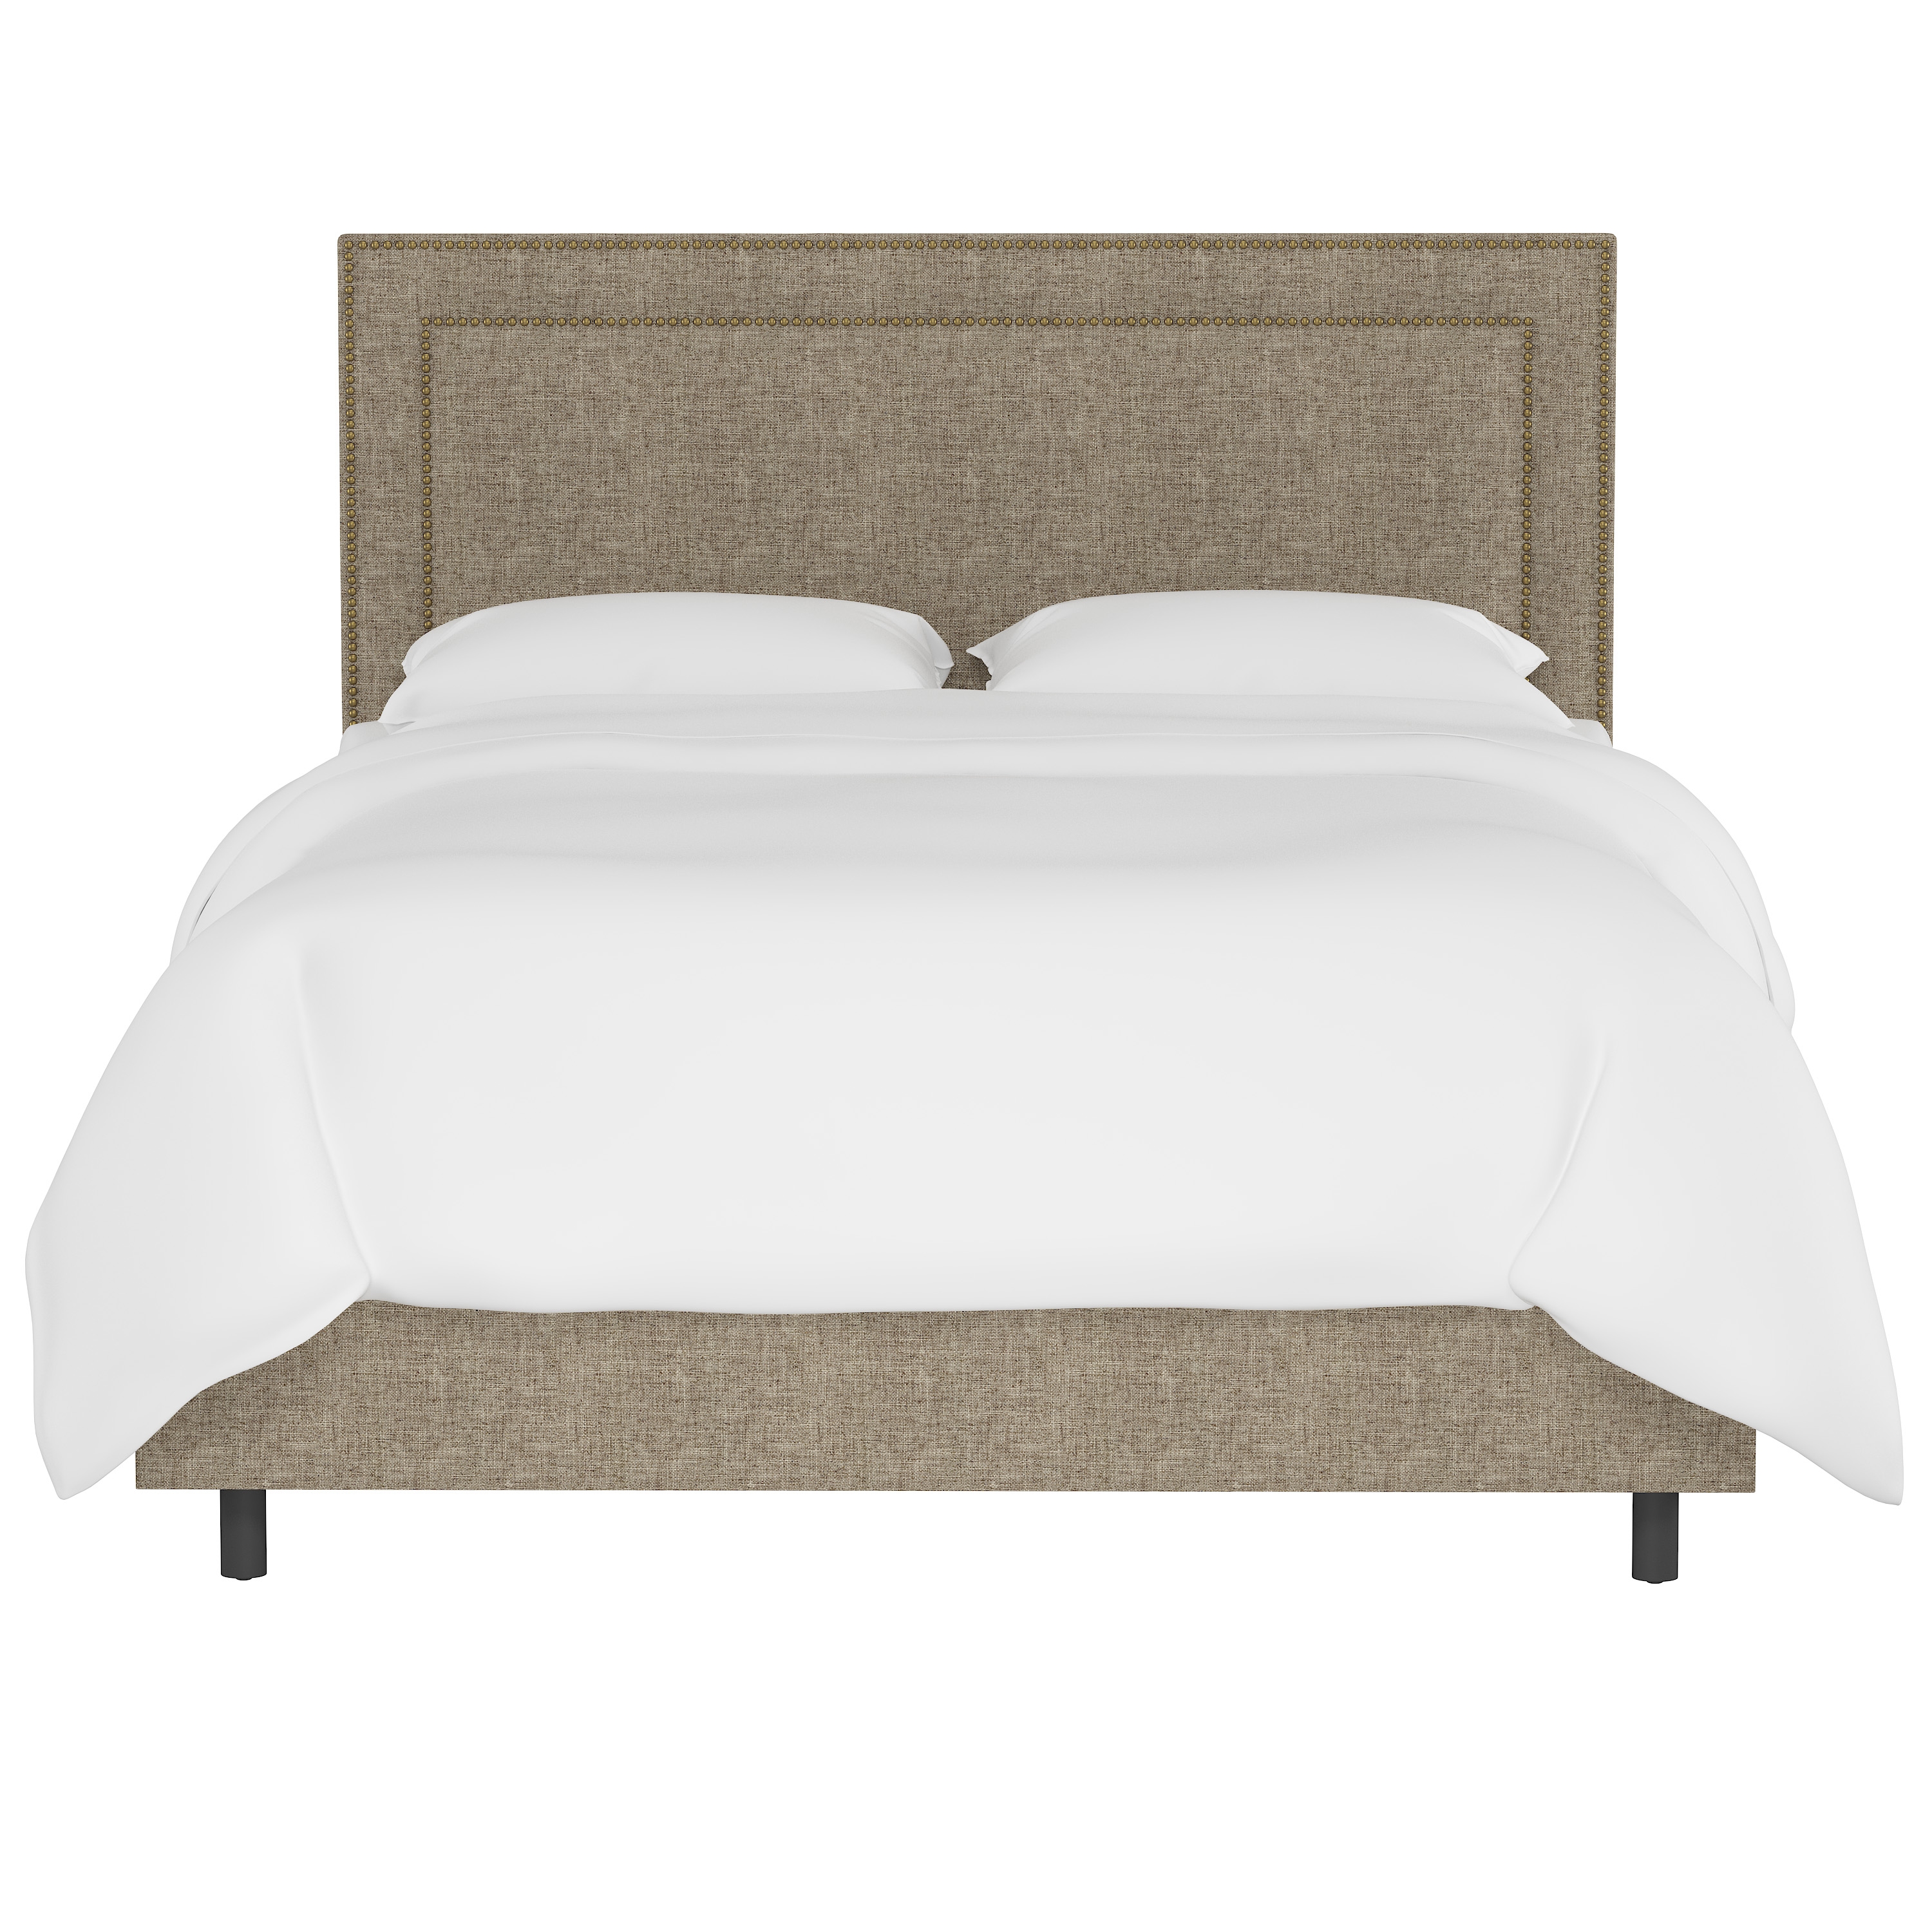 Williams Bed, California King, Linen, Brass Nailheads - Image 1